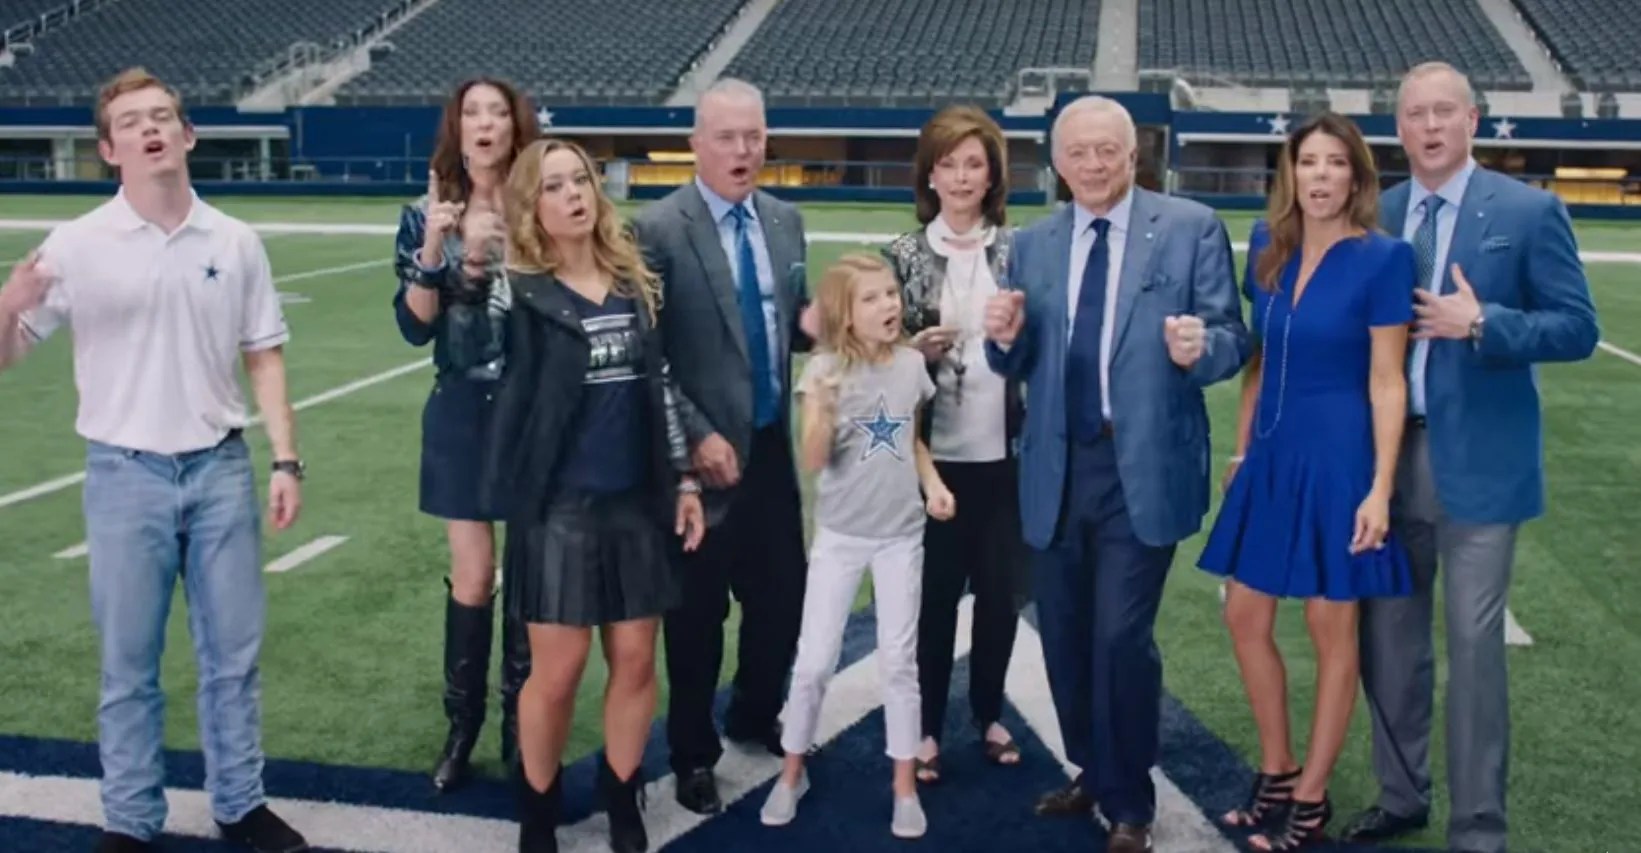 Jerry Jones and family dance to Motley Crue, and Mike Zimmer is not amused